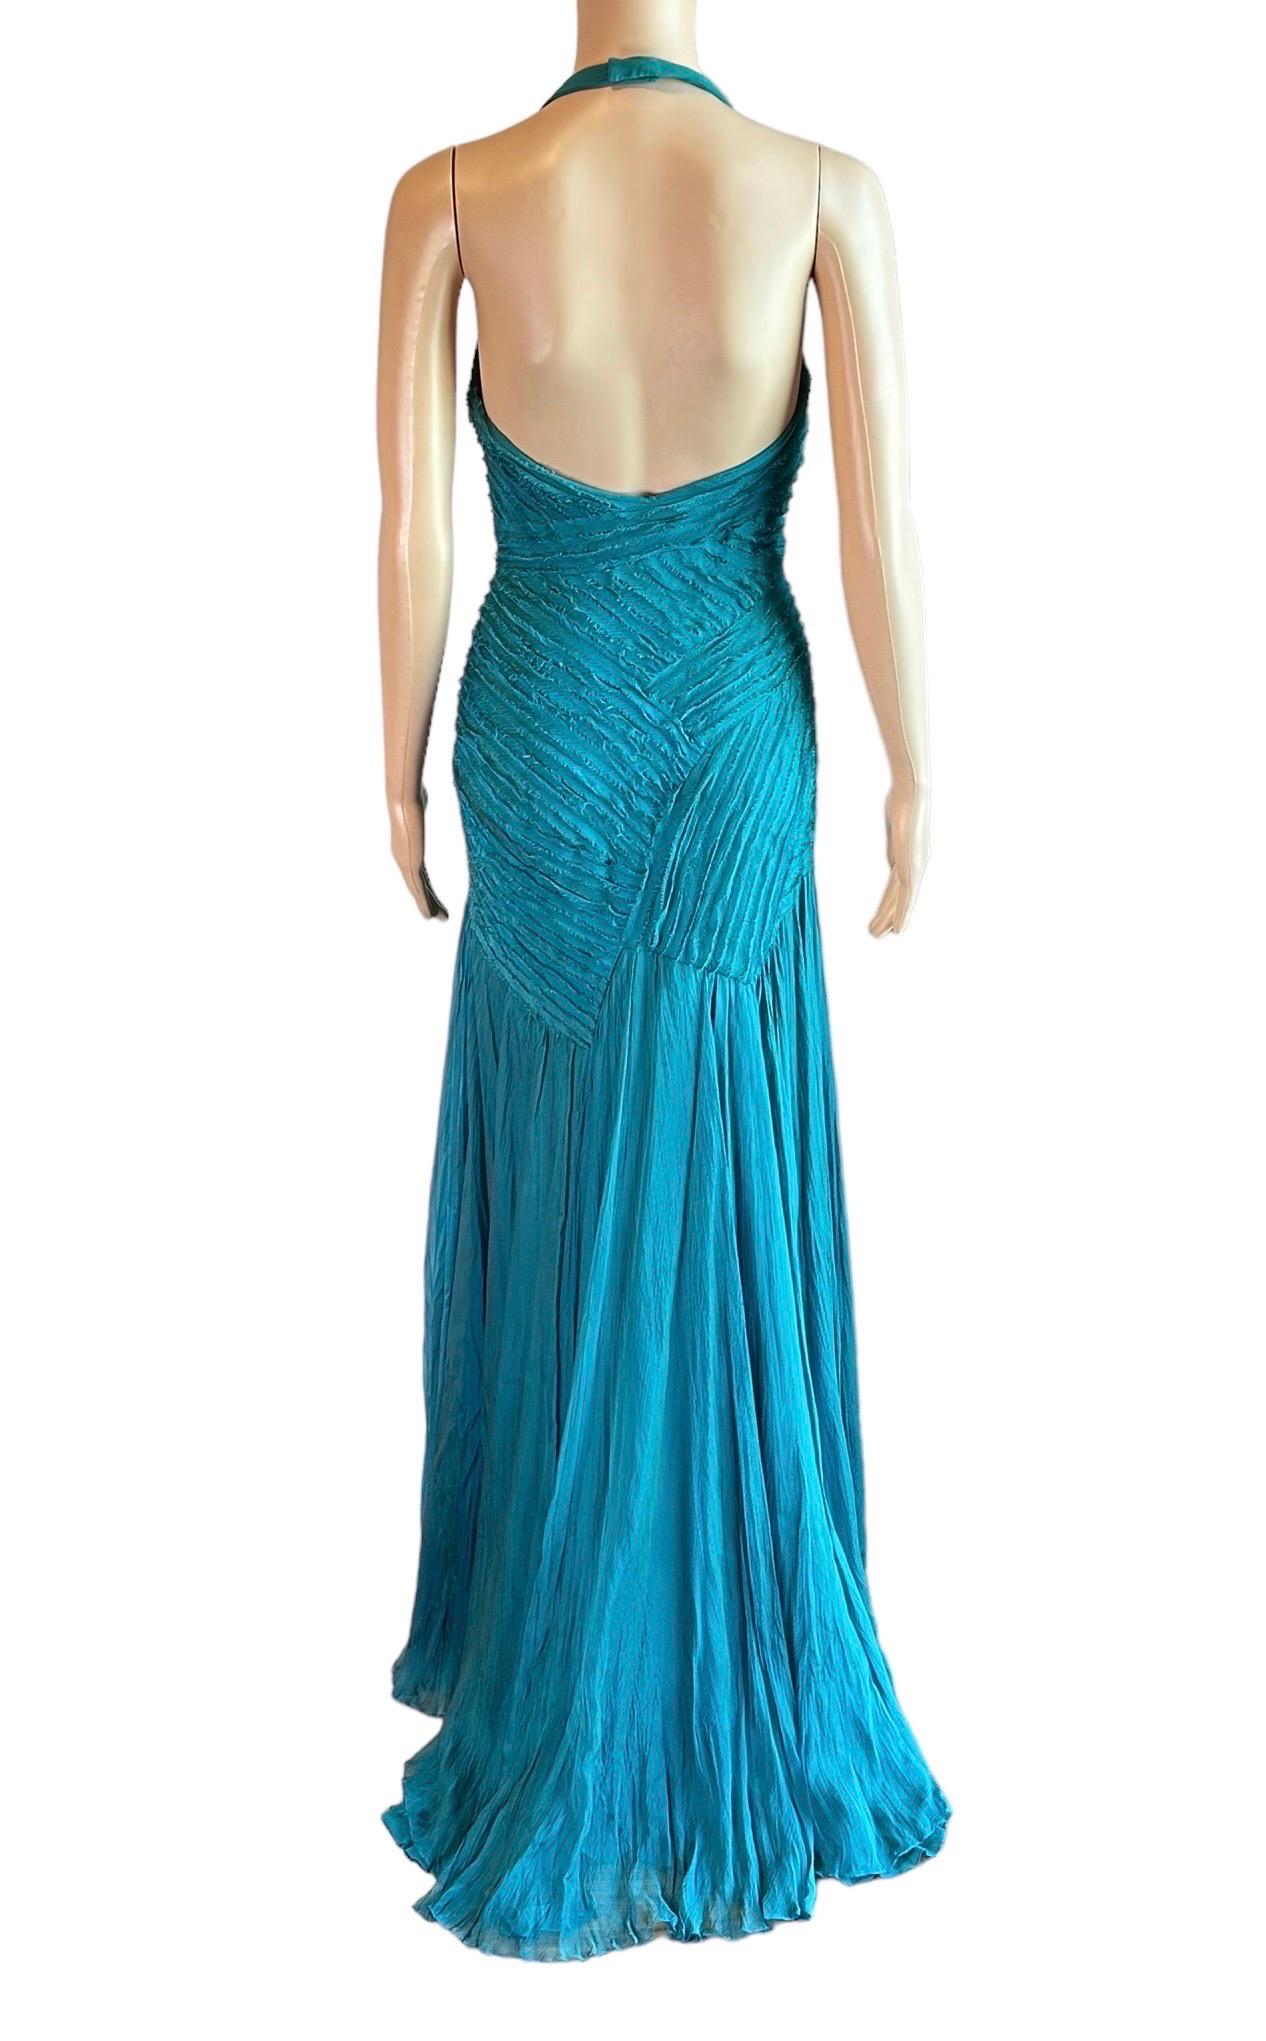 Versace F/W 2005 Runway Campaign Halter High Slit Slip Evening Dress Gown  For Sale 8